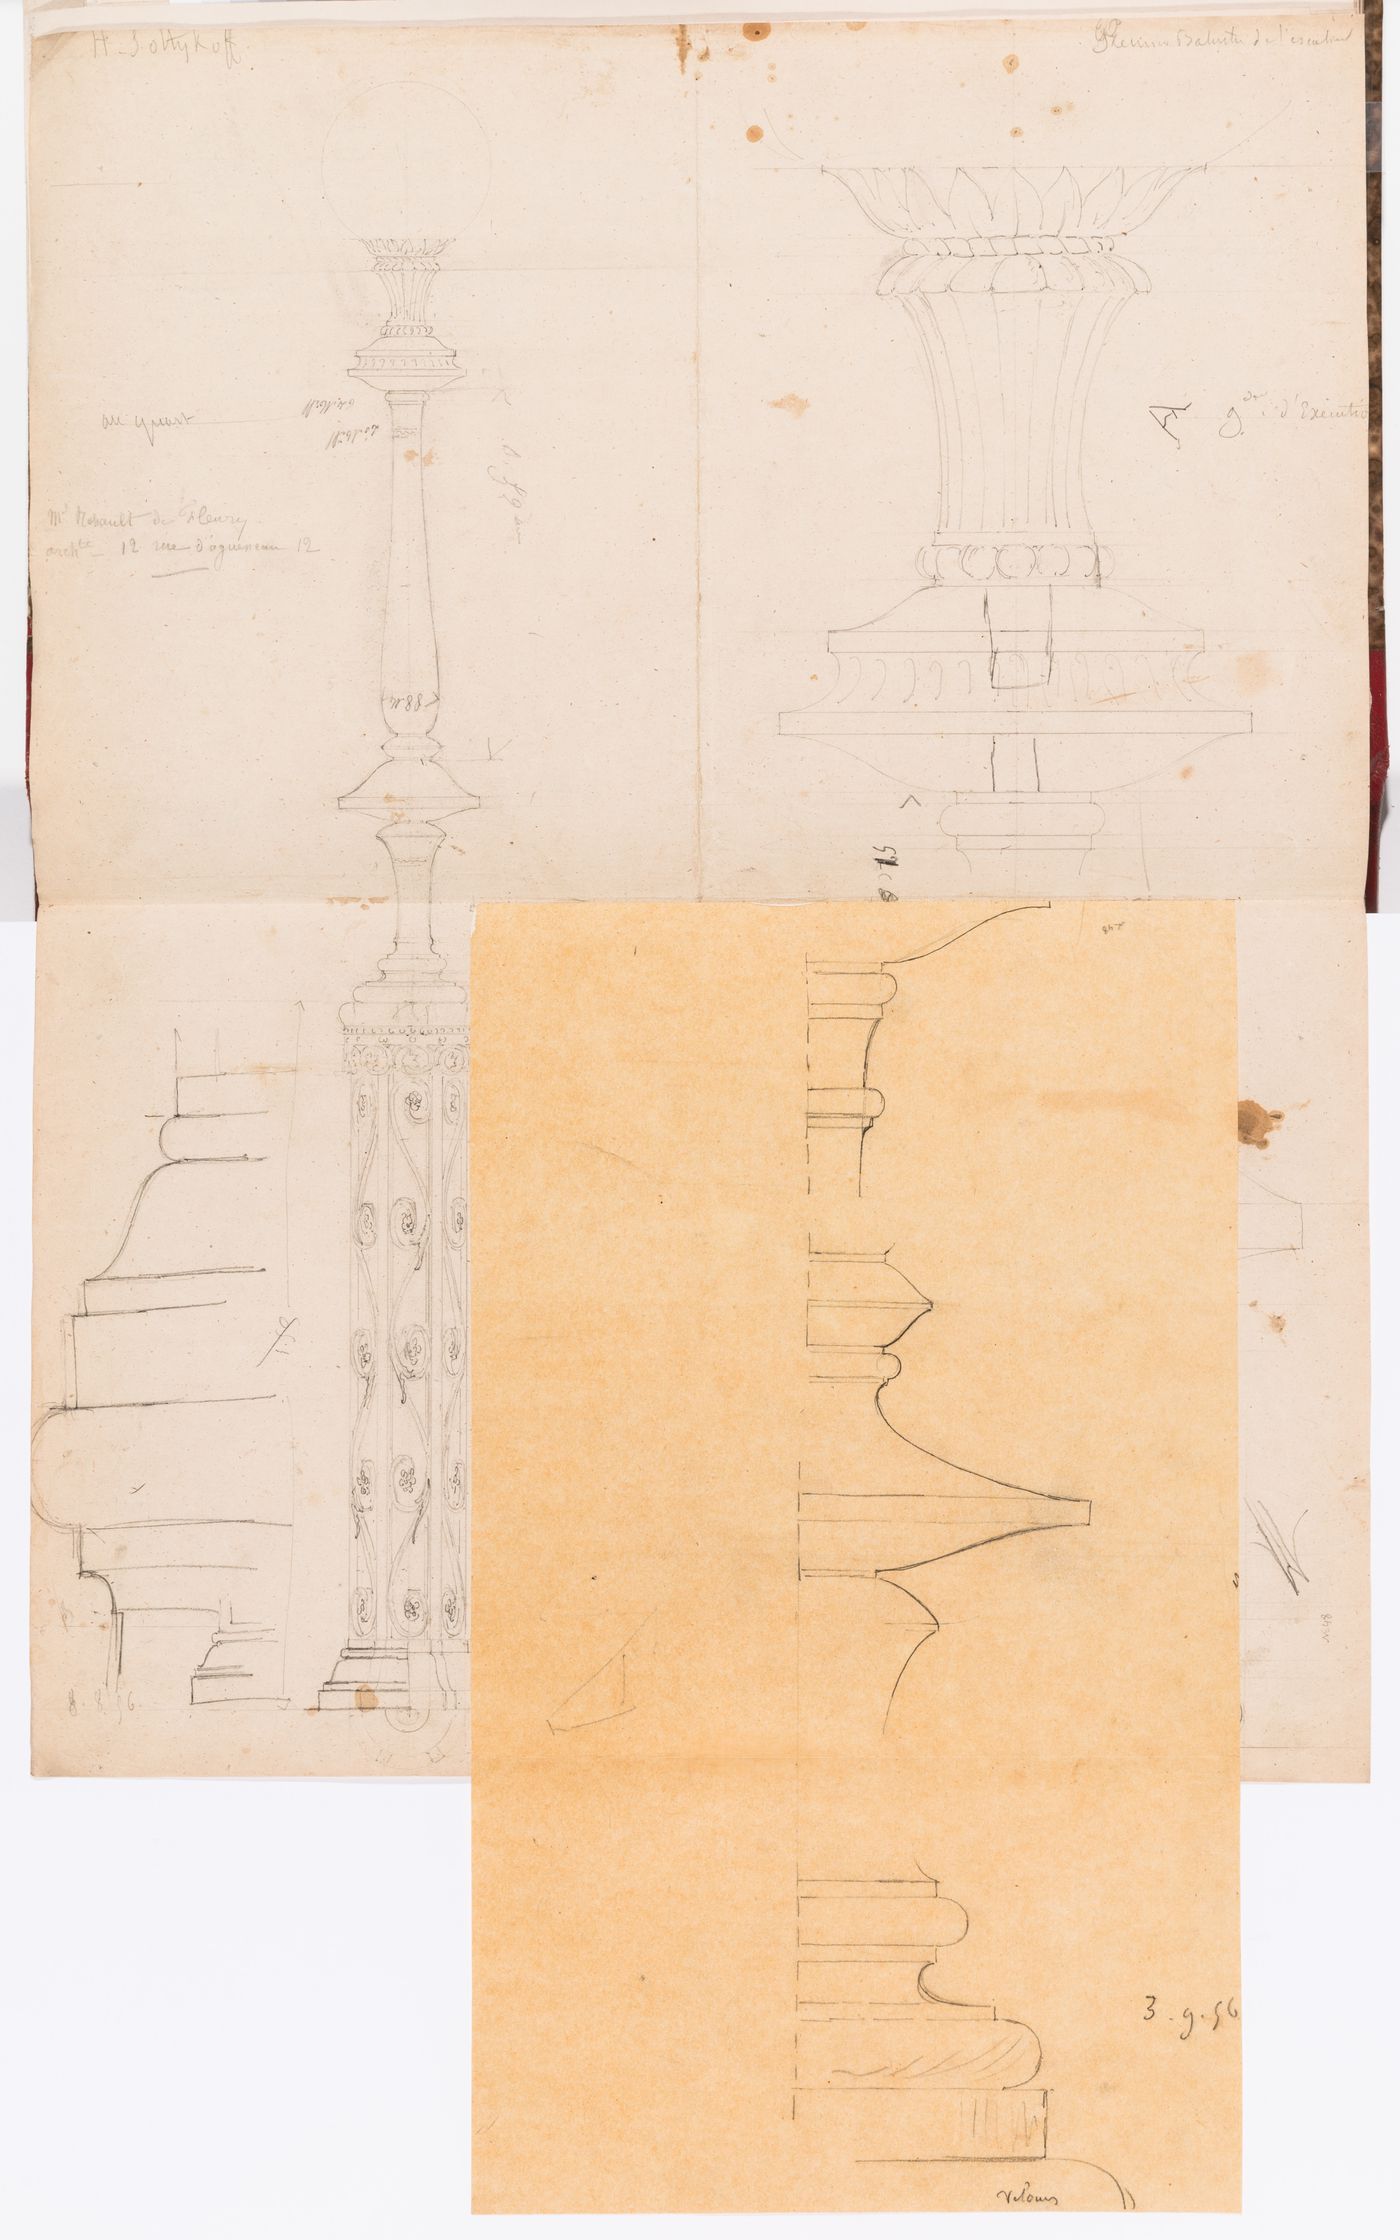 Sketches, elevations and profiles for a candelabra for the grand staircase, Hôtel Soltykoff